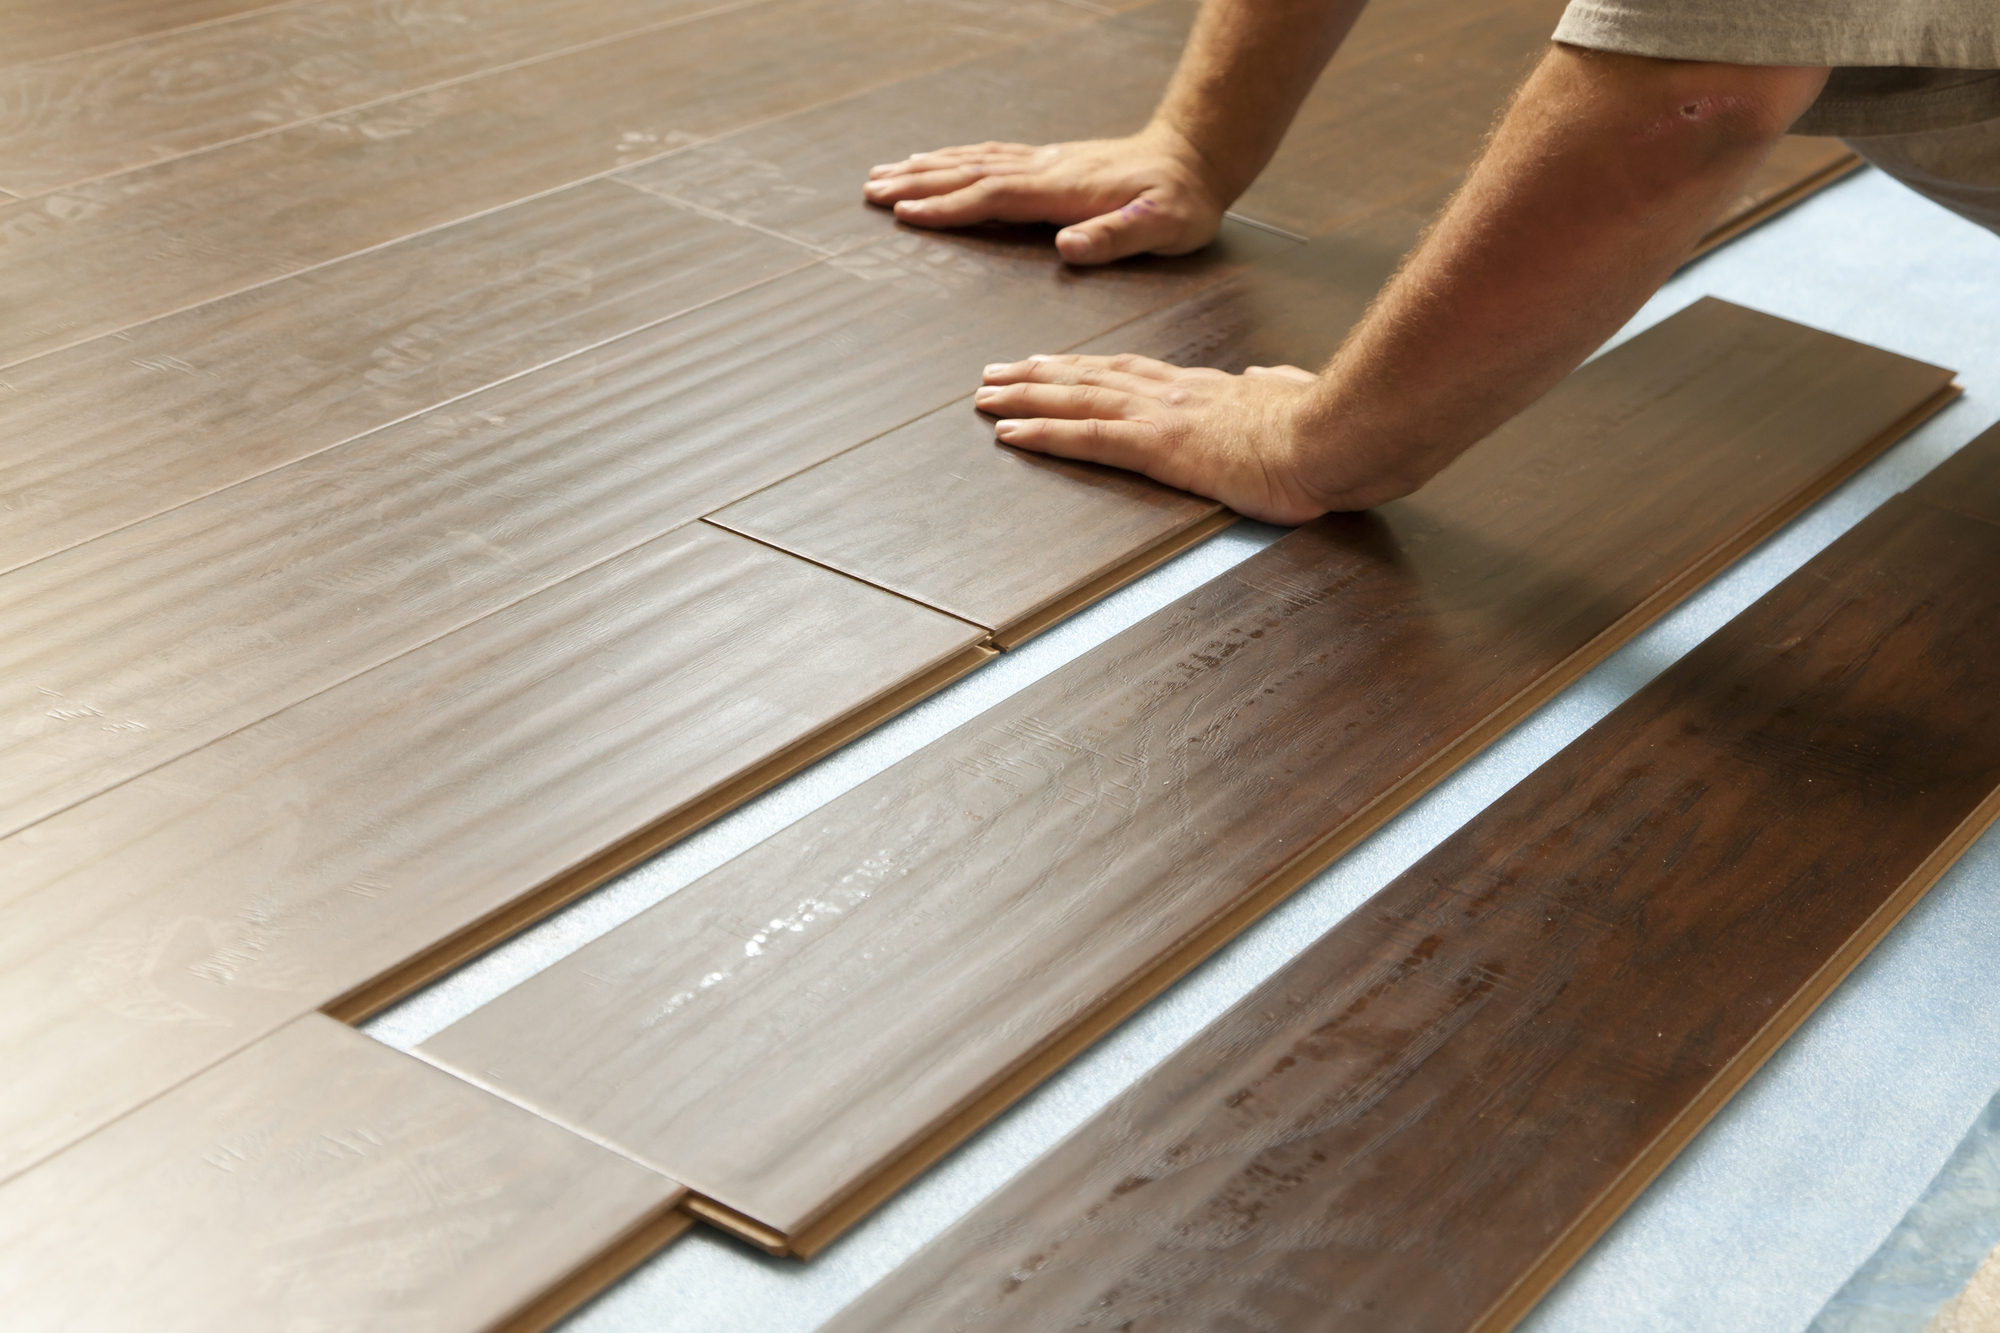 How to stop a bed moving: Laminate floor